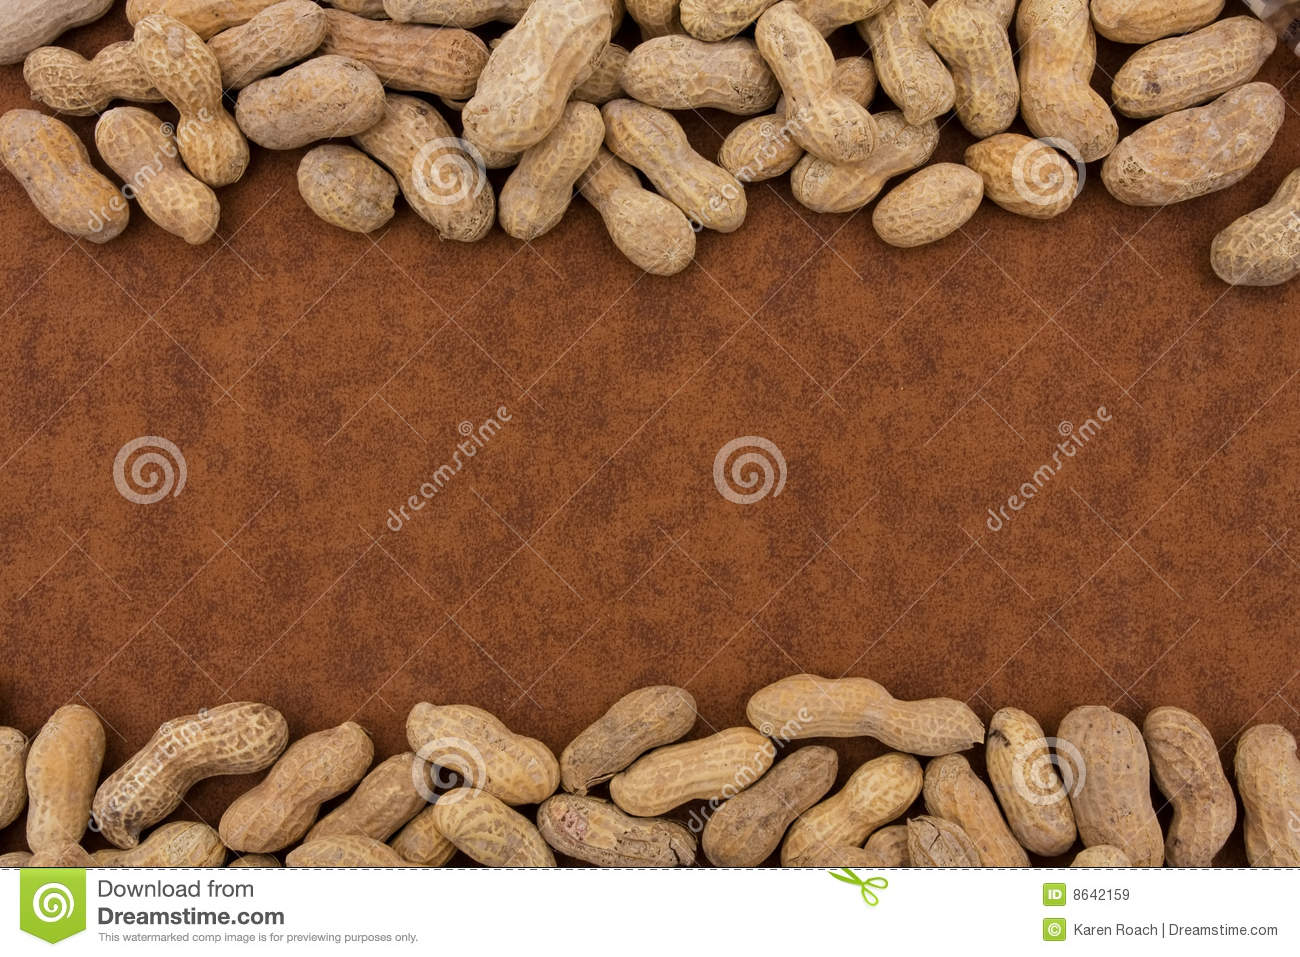 Peanuts In The Shell Making Border On A Brown Background Peanut